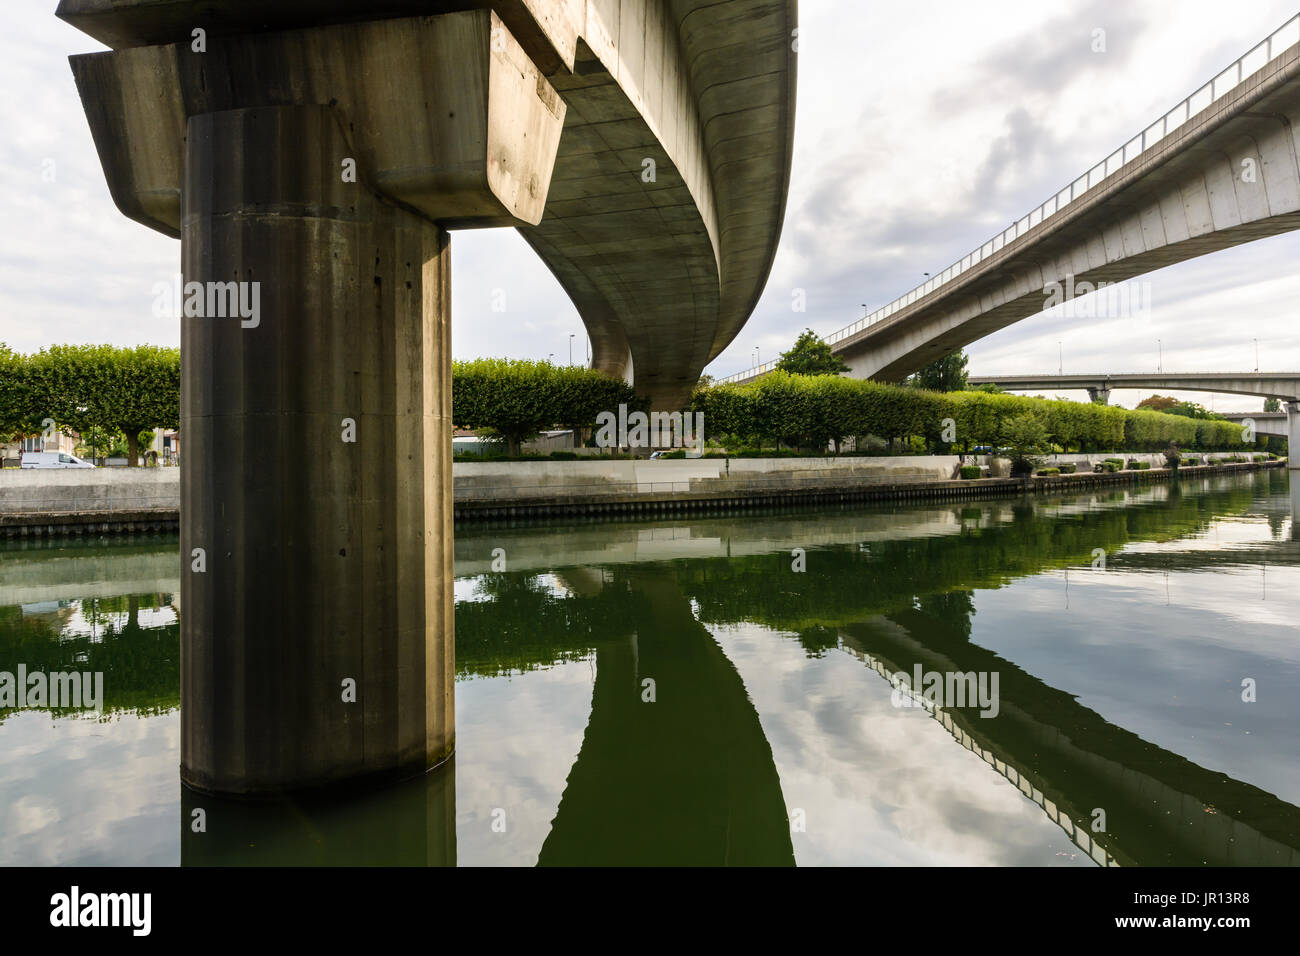 Highway junctions spanning and reflecting in the still waters of the river Marne under a cloudy sky. Stock Photo